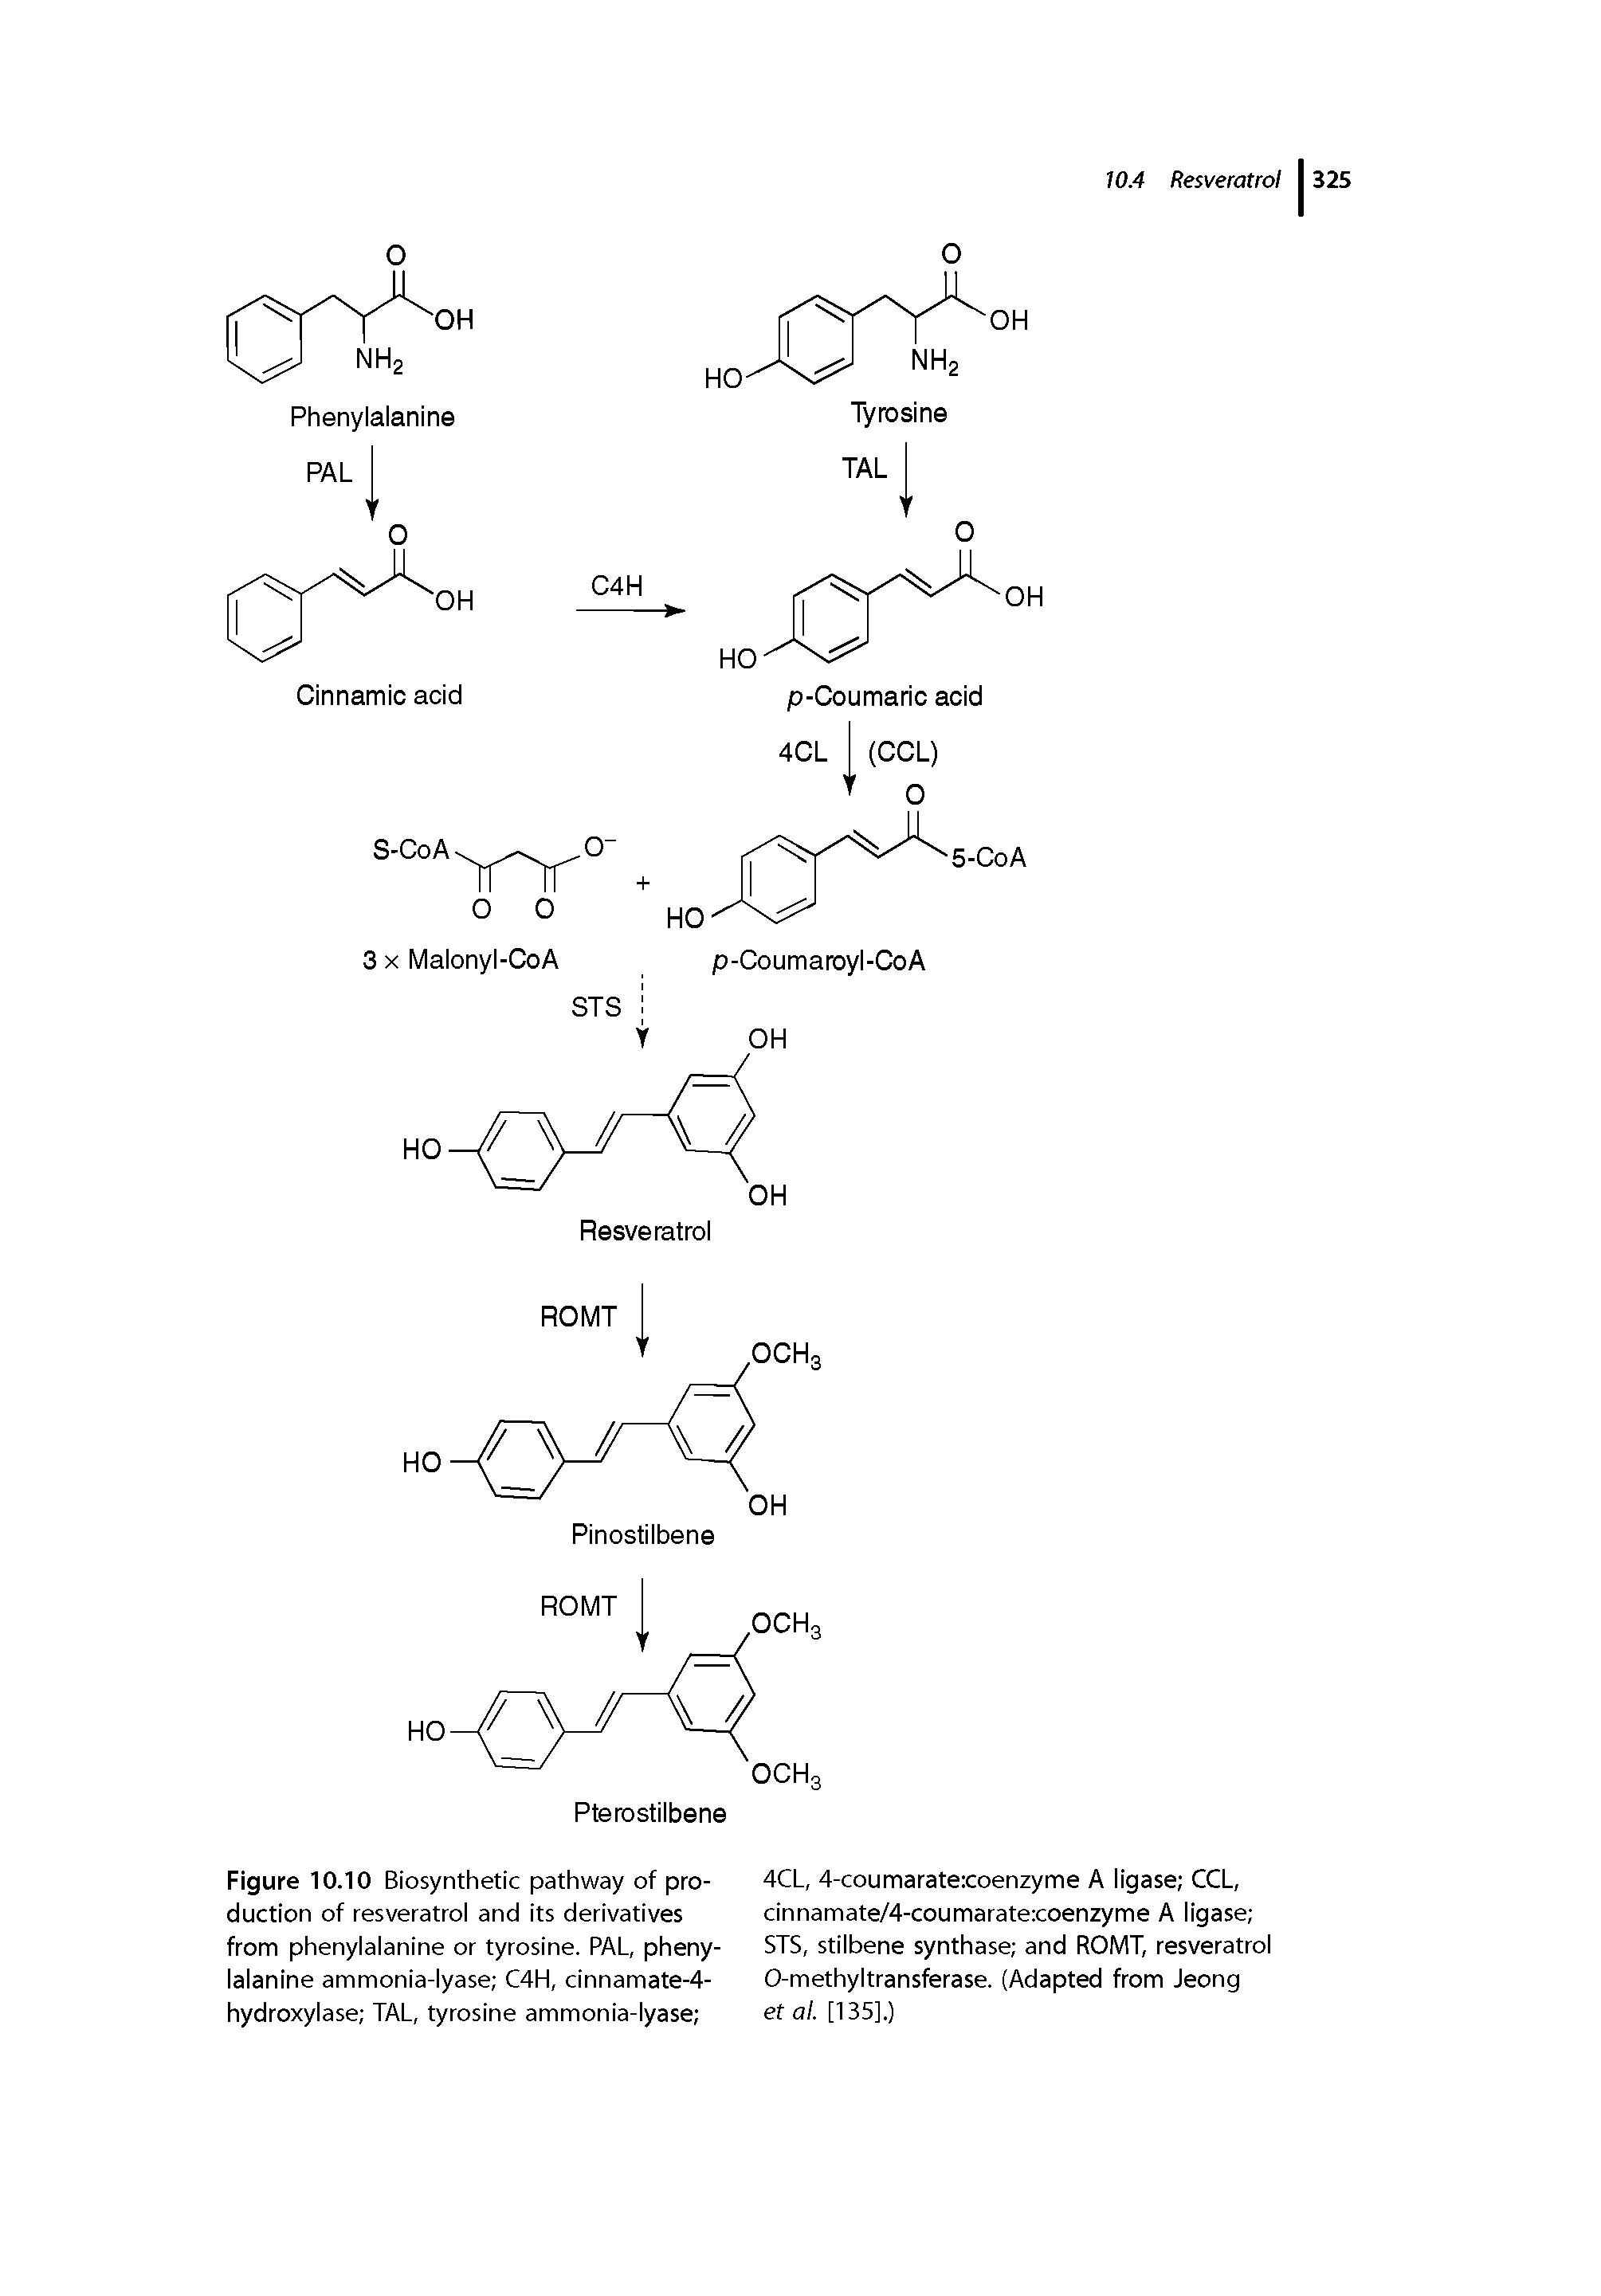 Figure 10.10 Biosynthetic pathway of pro- 4CL, 4-coumarate coenzyme A iigase CCL, duction of resveratrol and its derivatives cinnamate/4-coumarate coenzyme A Iigase from phenylalanine or tyrosine. PAL, pheny- STS, stilbene synthase and ROMT, resveratrol lalanine ammonia-lyase C4H, clnnamate-4- 0-methyltransferase. (Adapted from Jeong hydroxylase TAL, tyrosine ammonla-lyase et al. [135].)...